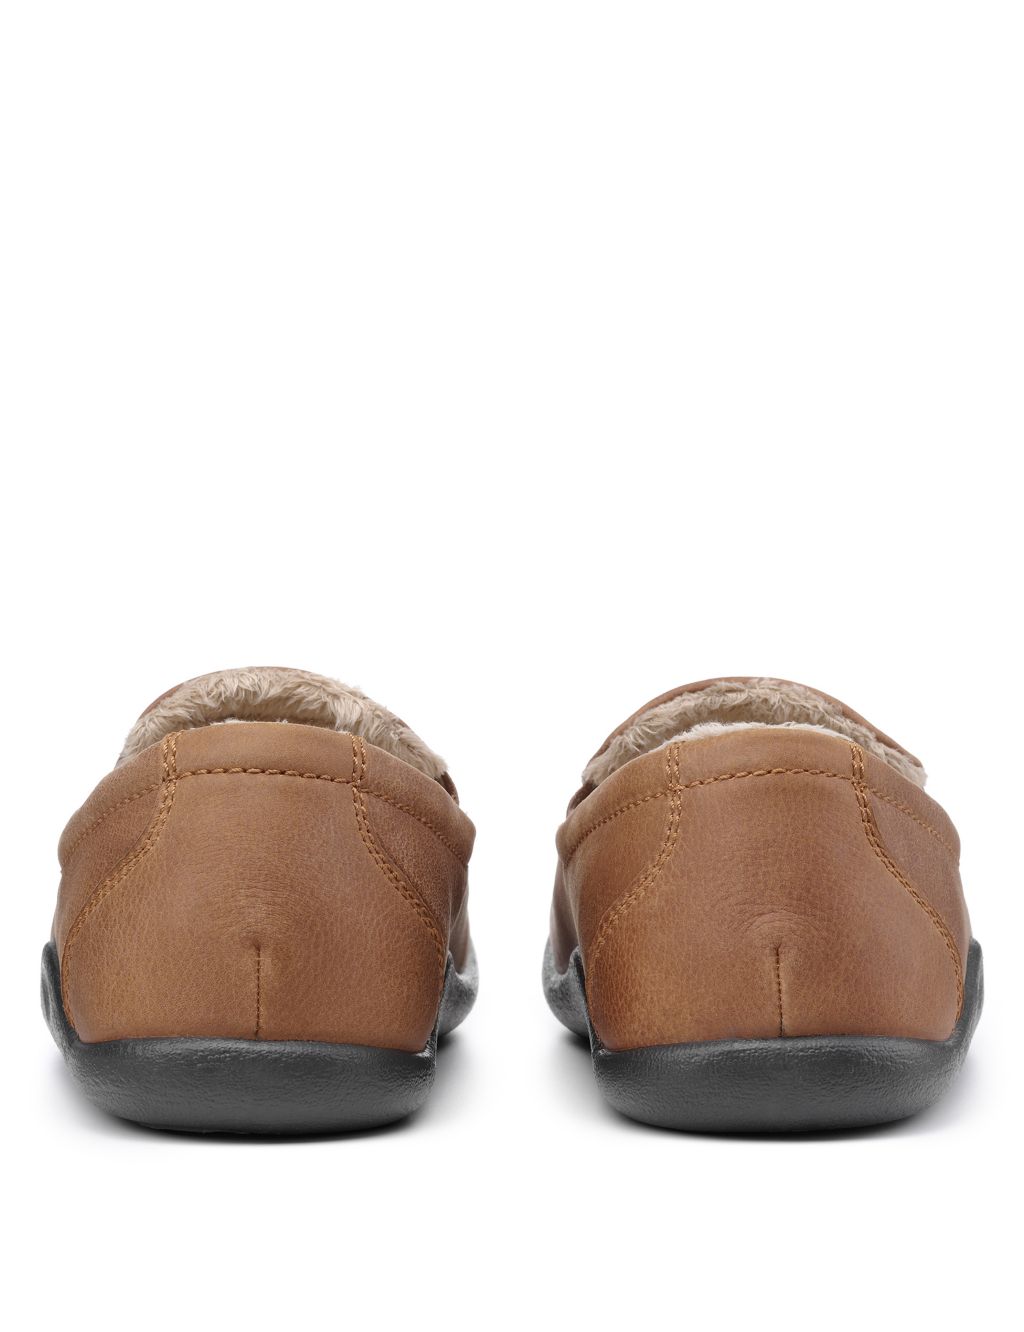 Leather Slippers image 4